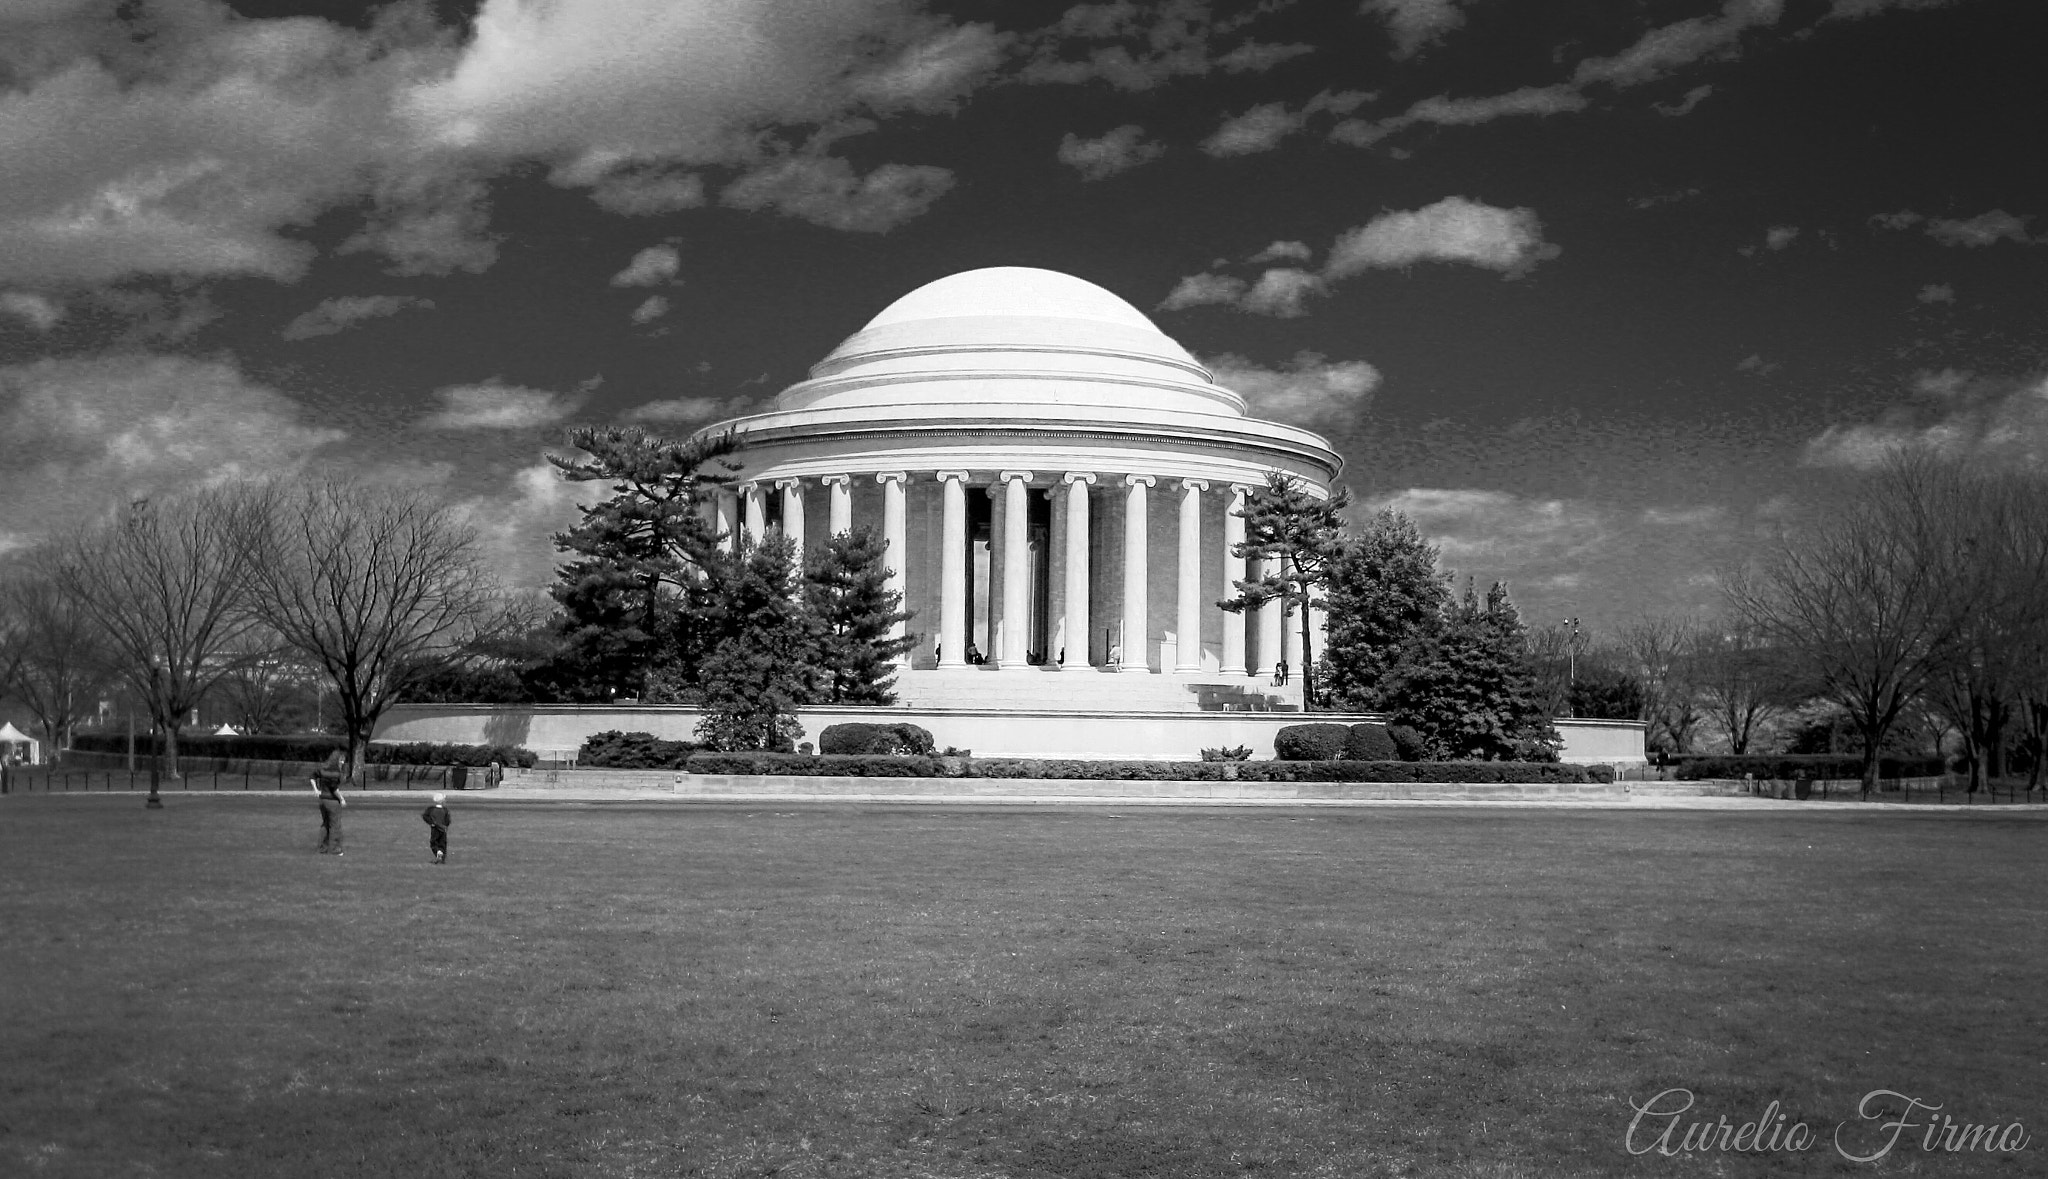 Canon PowerShot SD790 IS (Digital IXUS 90 IS / IXY Digital 95 IS) sample photo. The thomas jefferson memorial is a presidential me ... photography